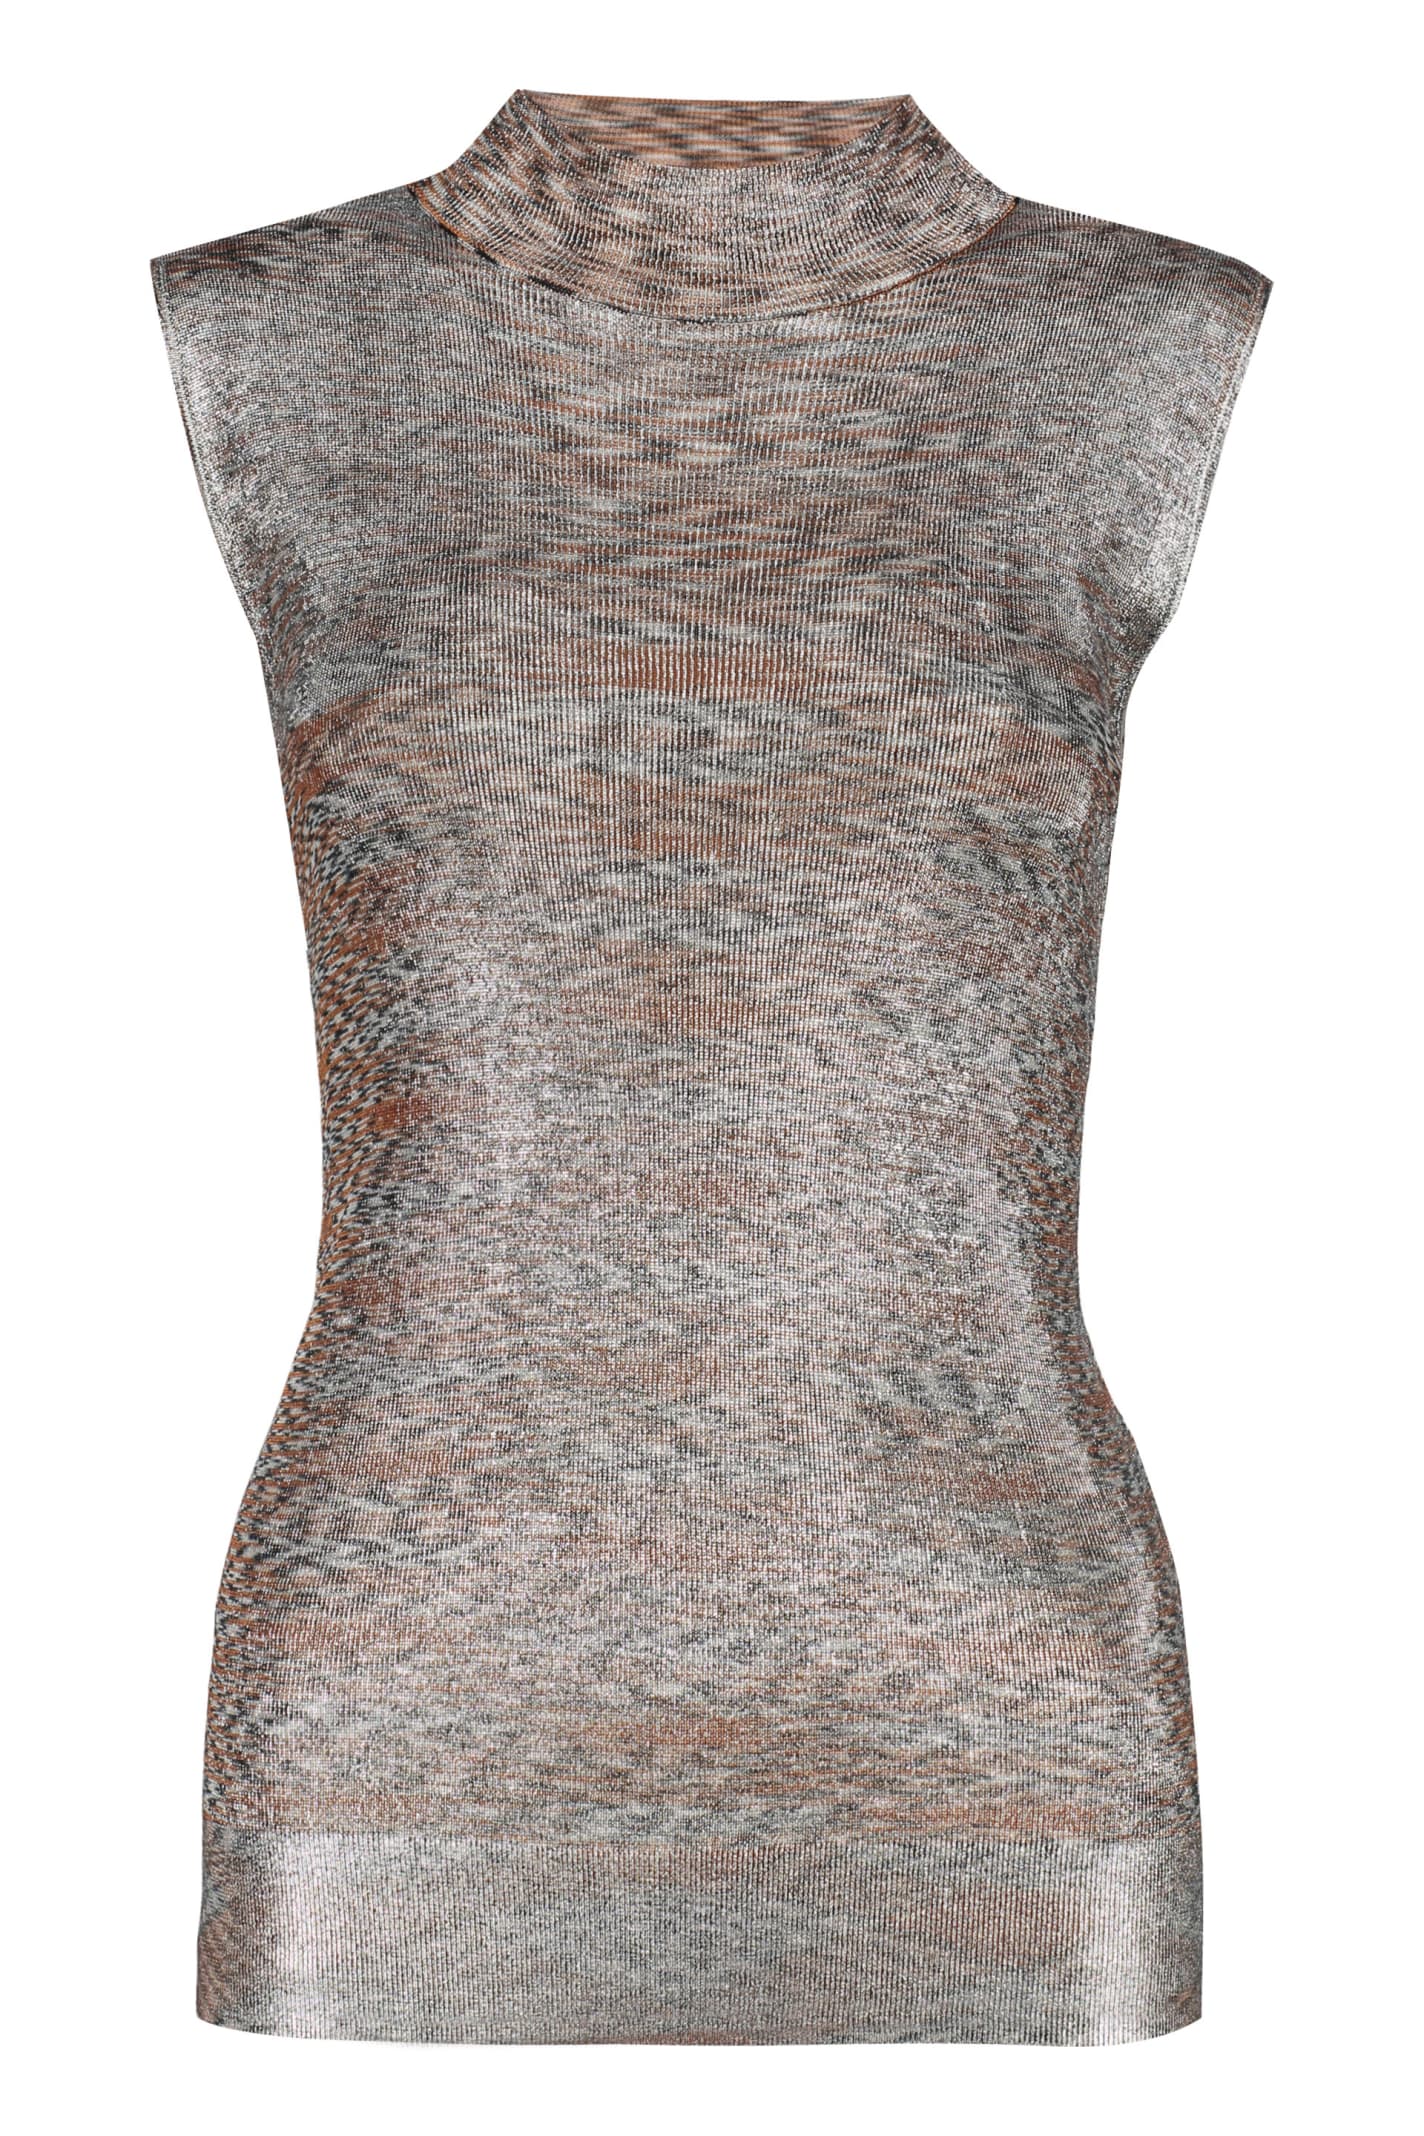 Missoni Knitted Lurex Top In Silver